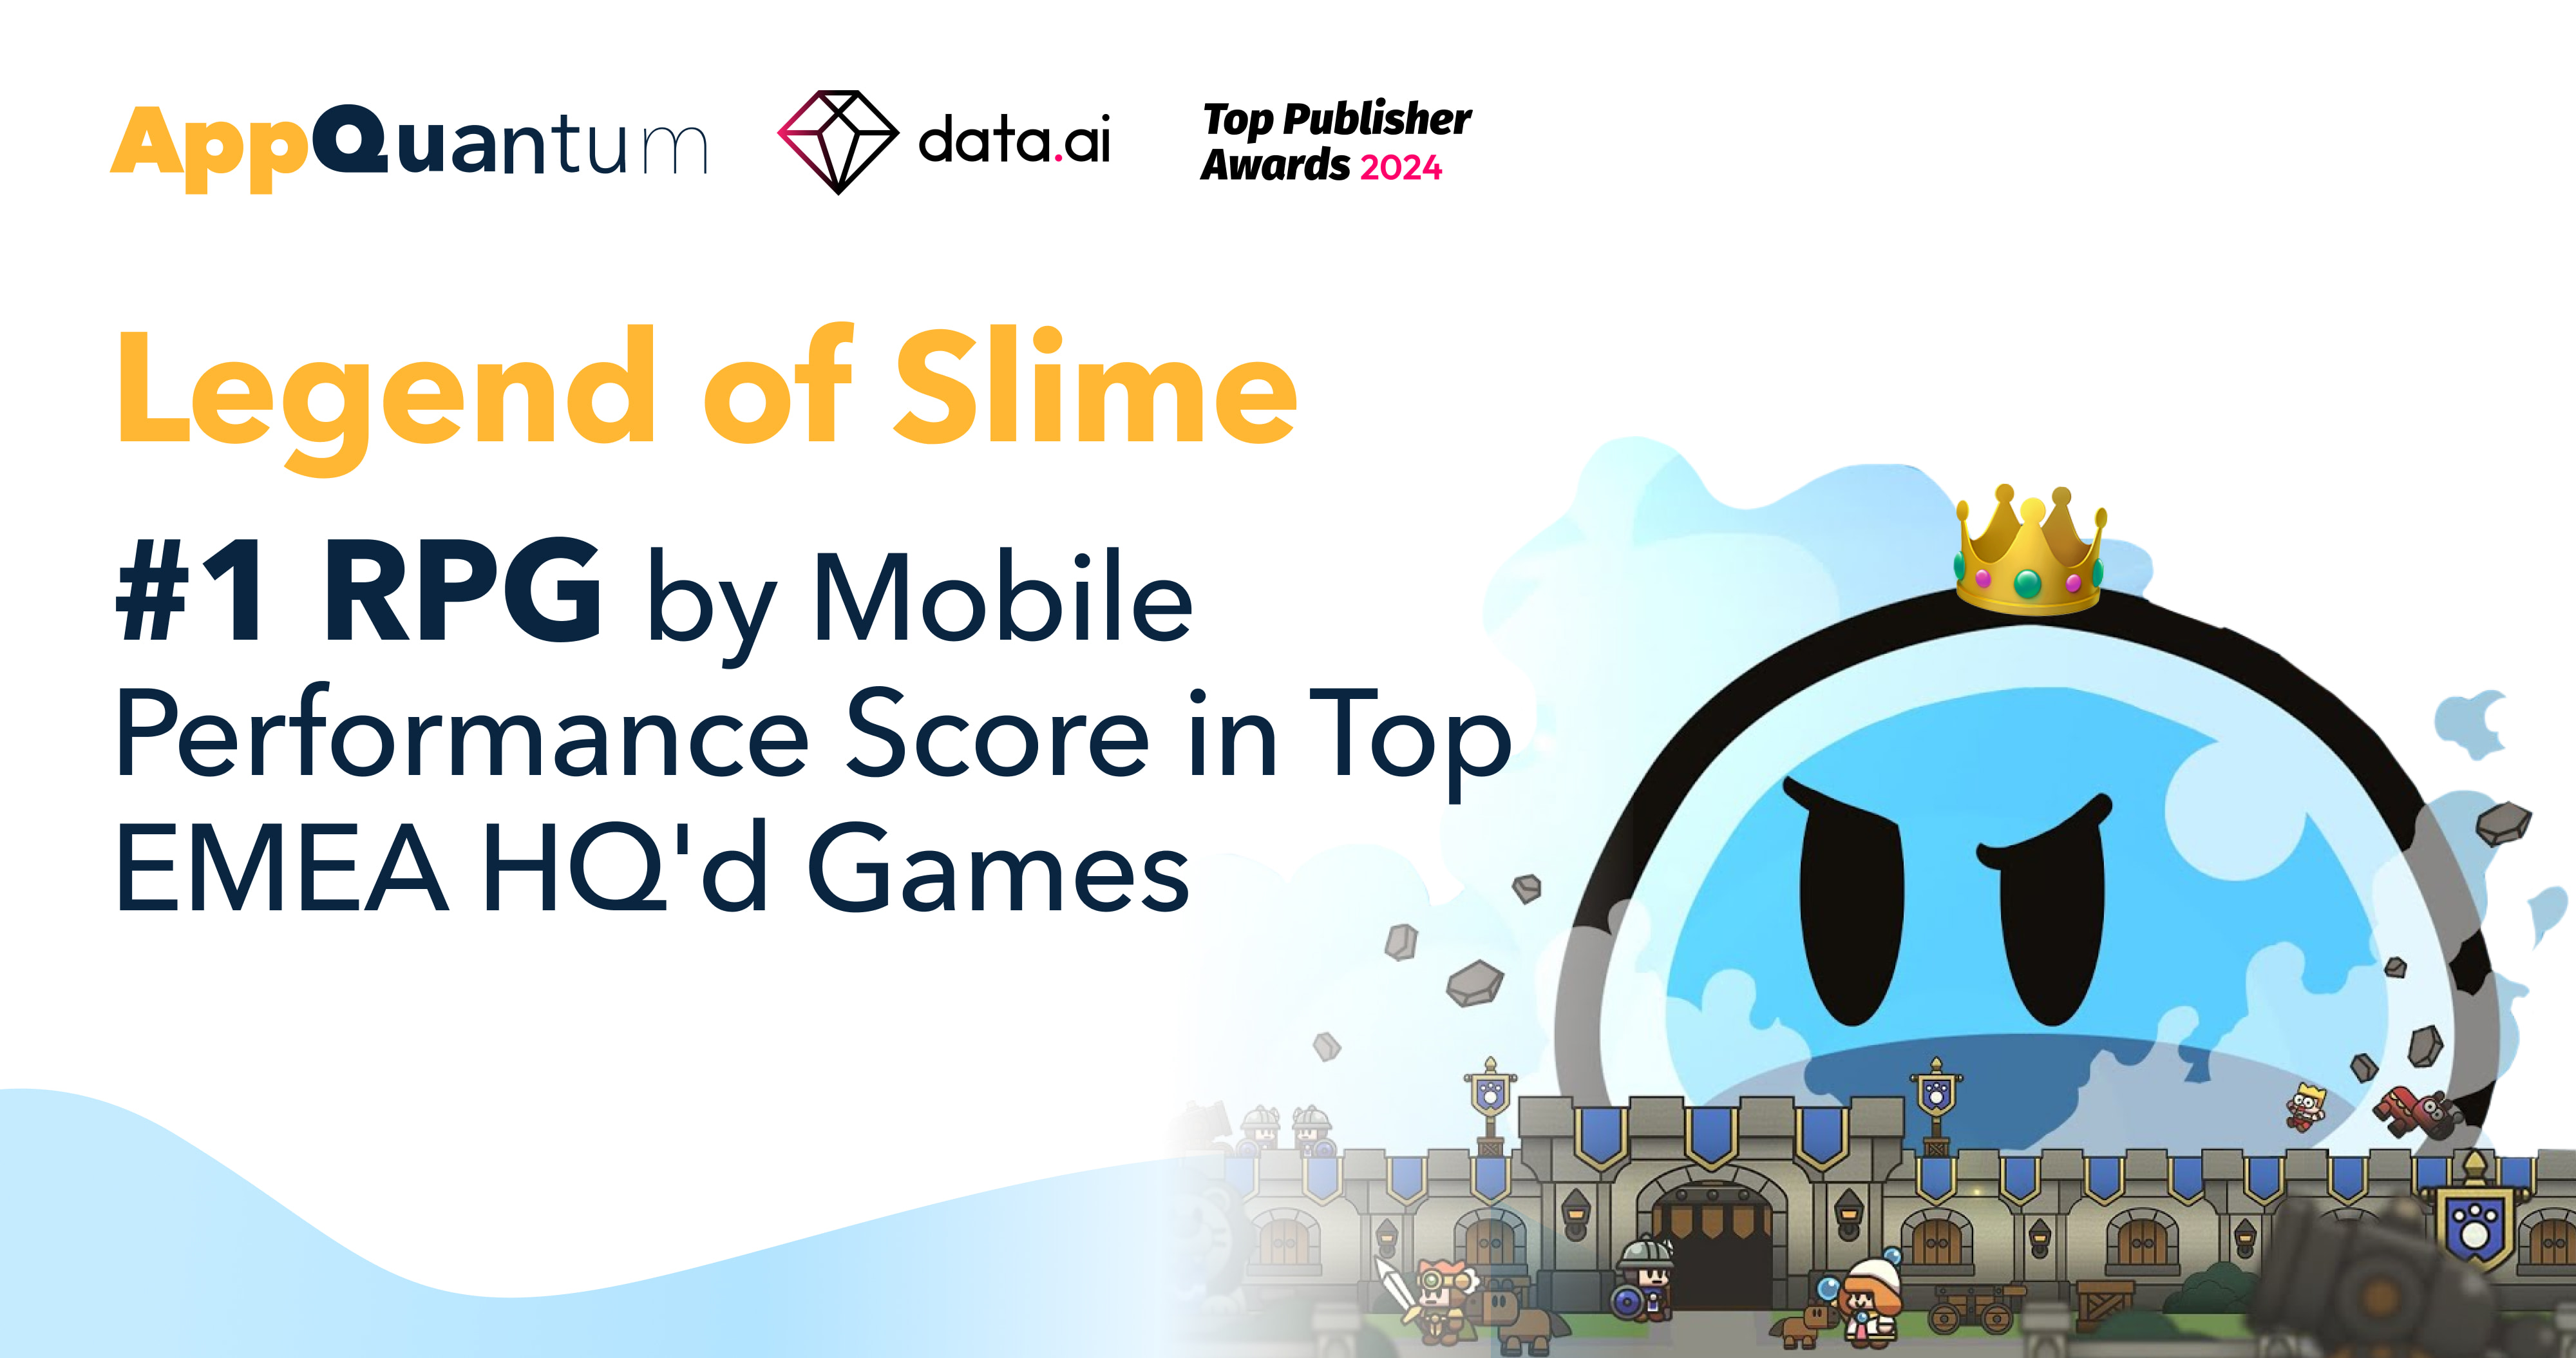 data.ai has spotlighted the accomplishments of Legend of Slime in the Top Publisher Awards 2024